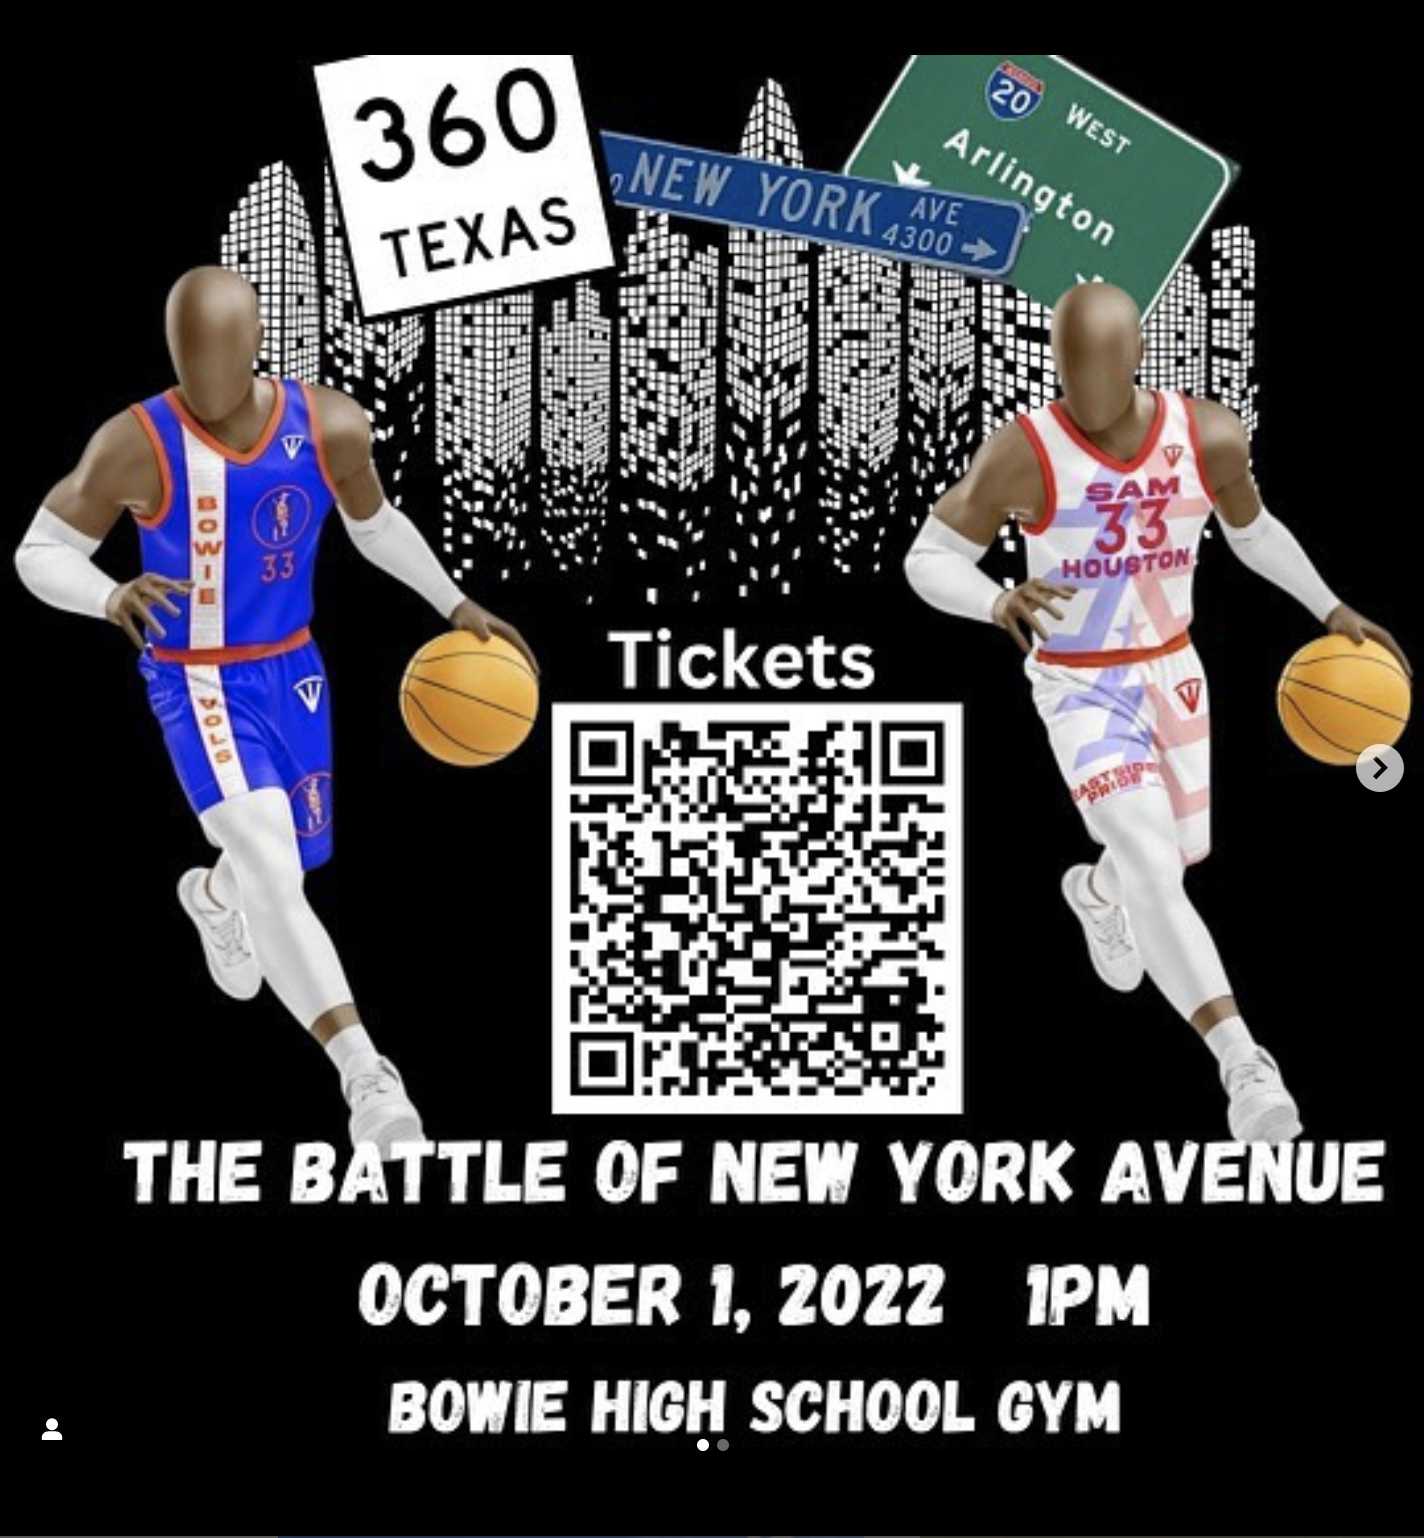 The Battle Of New York Ave Arl Bowie High vs Sam Houston High on Oct 01, 13:00@Bowie High School Gym - Buy tickets and Get information on METROPLEX ALUMNI GAMES 